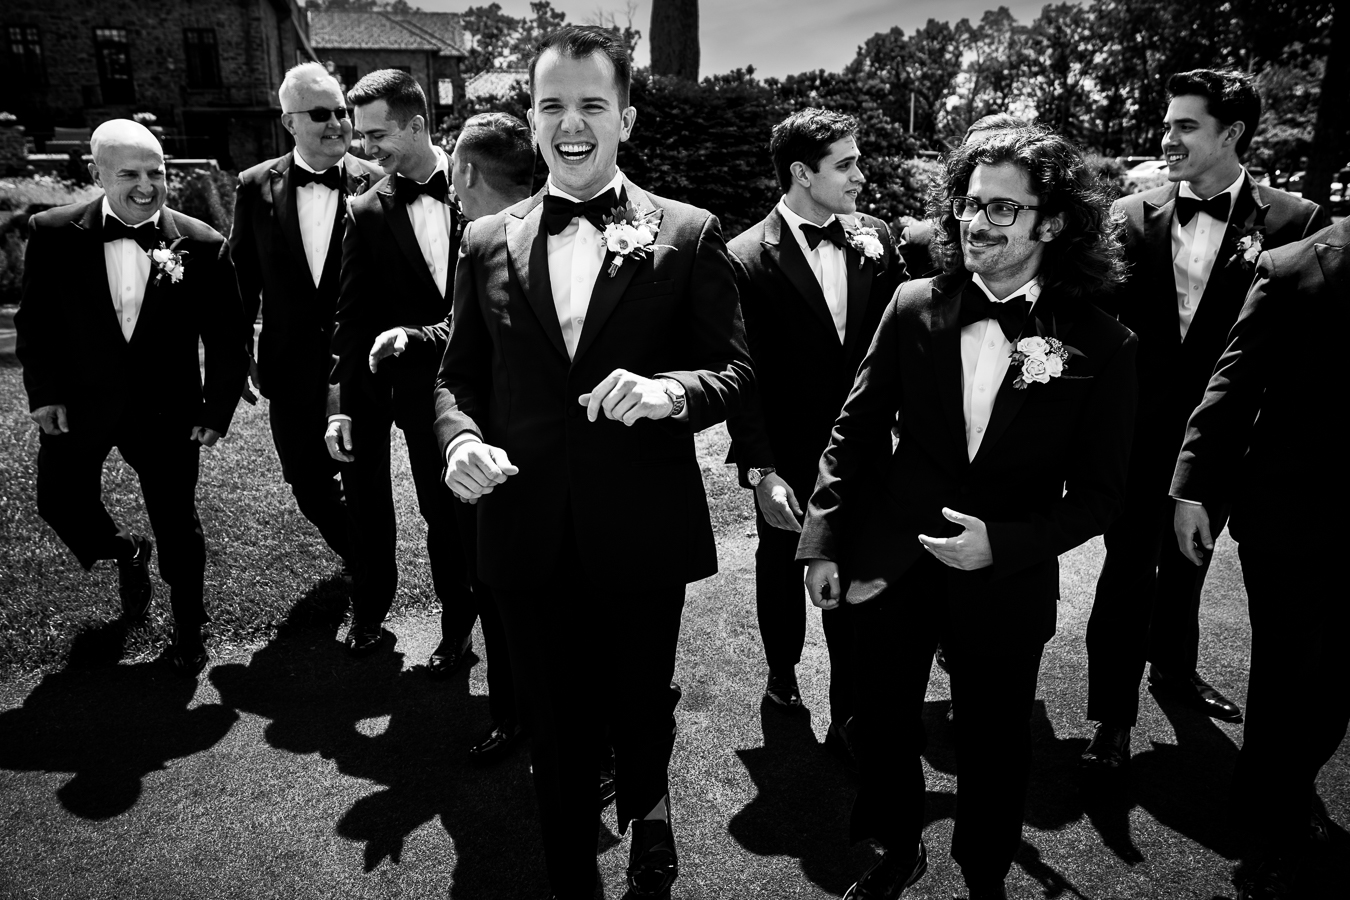 best pa wedding photographer, lisa rhinehart, captures this fun creative black and white image of the groom and his groomsmen laughing with one another 